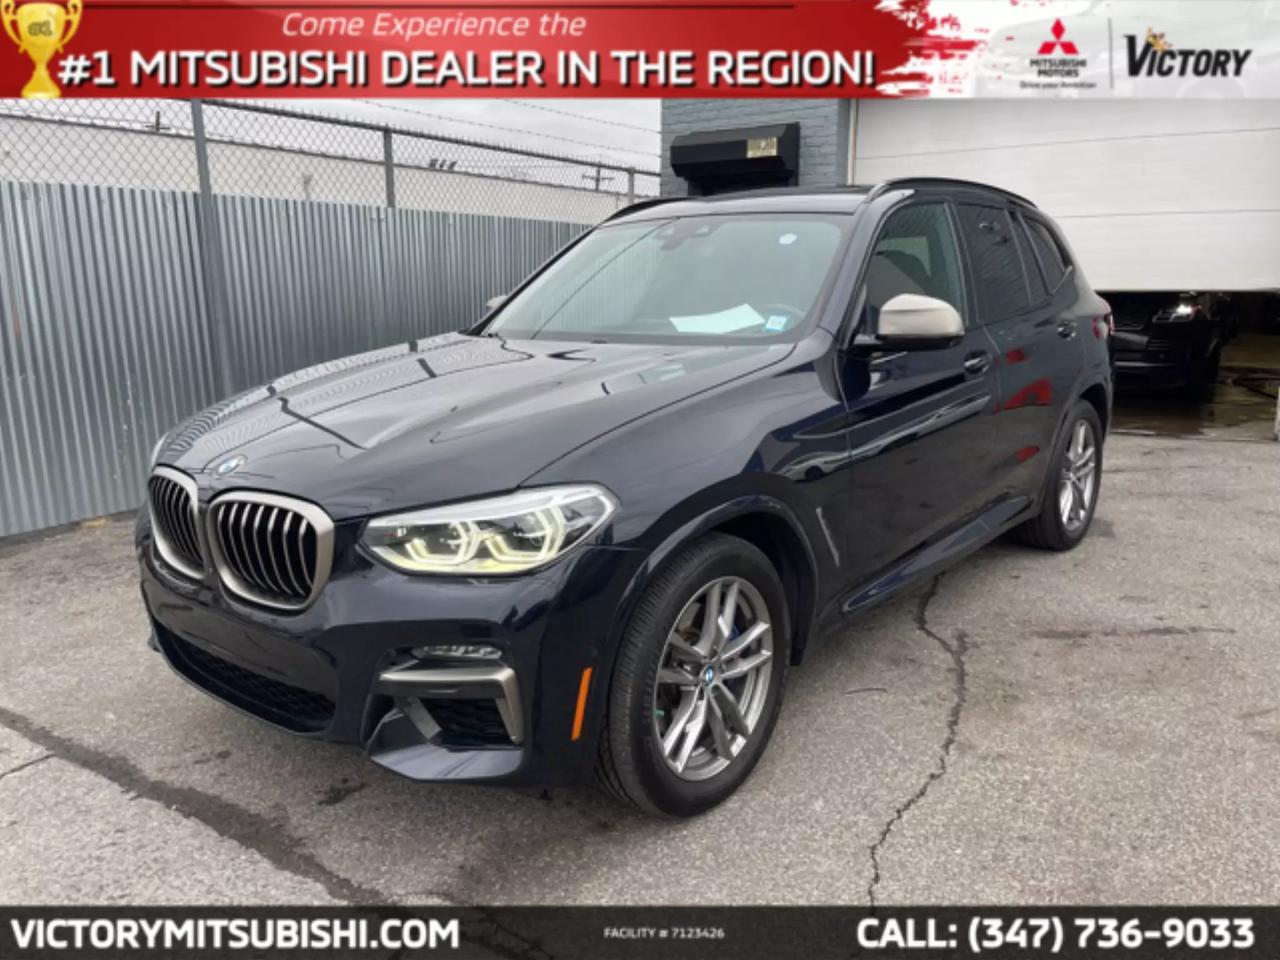 Used BMW X3 in Carbon Black Metallic For Sale: Check Photos, Prices And  Dealers Near Me